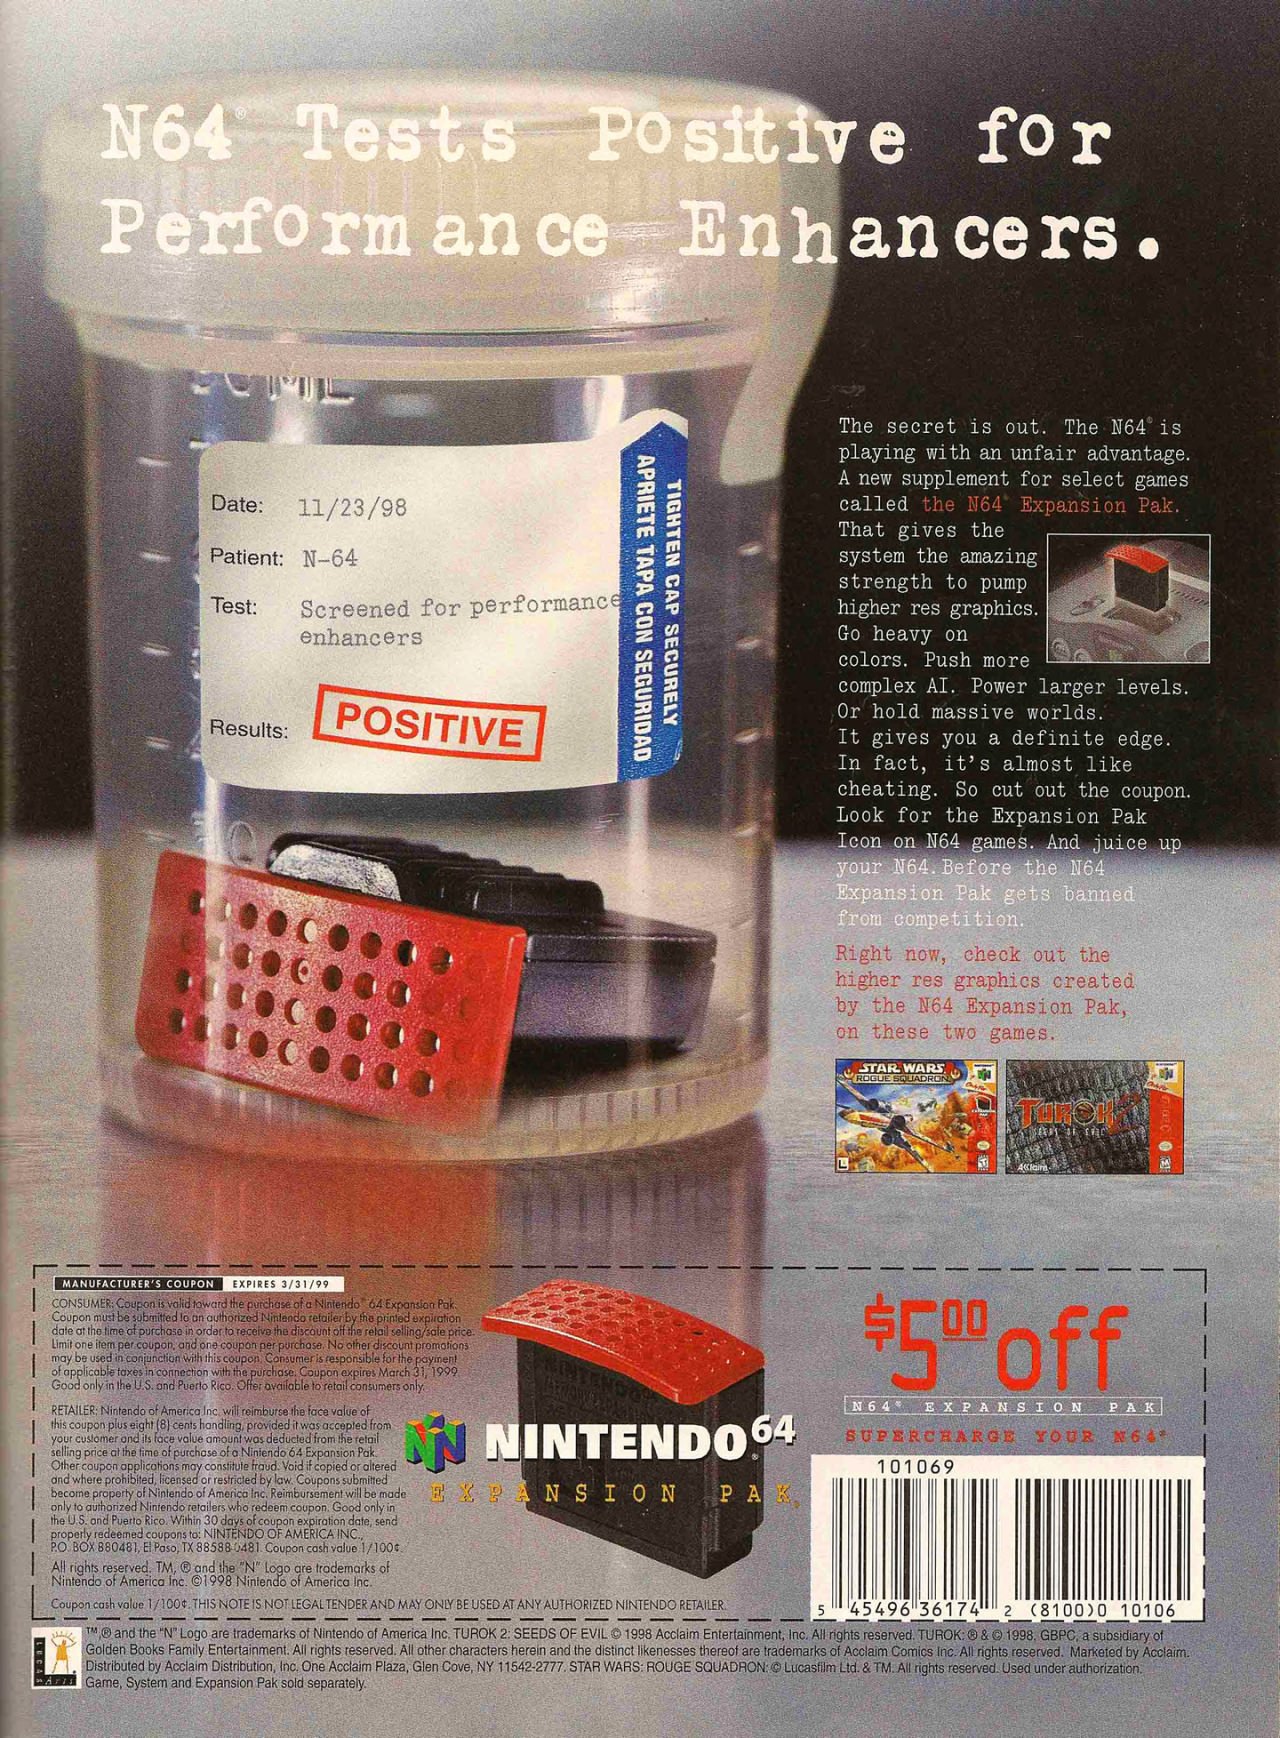 coupon - N64 Tests Positive for Performance Enhancers. Onte 112390 Pater N64 The Screened for performance manches Resu e manu Positive Tighten Apriete Tapa Con Seguridad Gaf Securely Nintendo 64 Nsion Pa The secret is out. The 504 playing with an unfair s